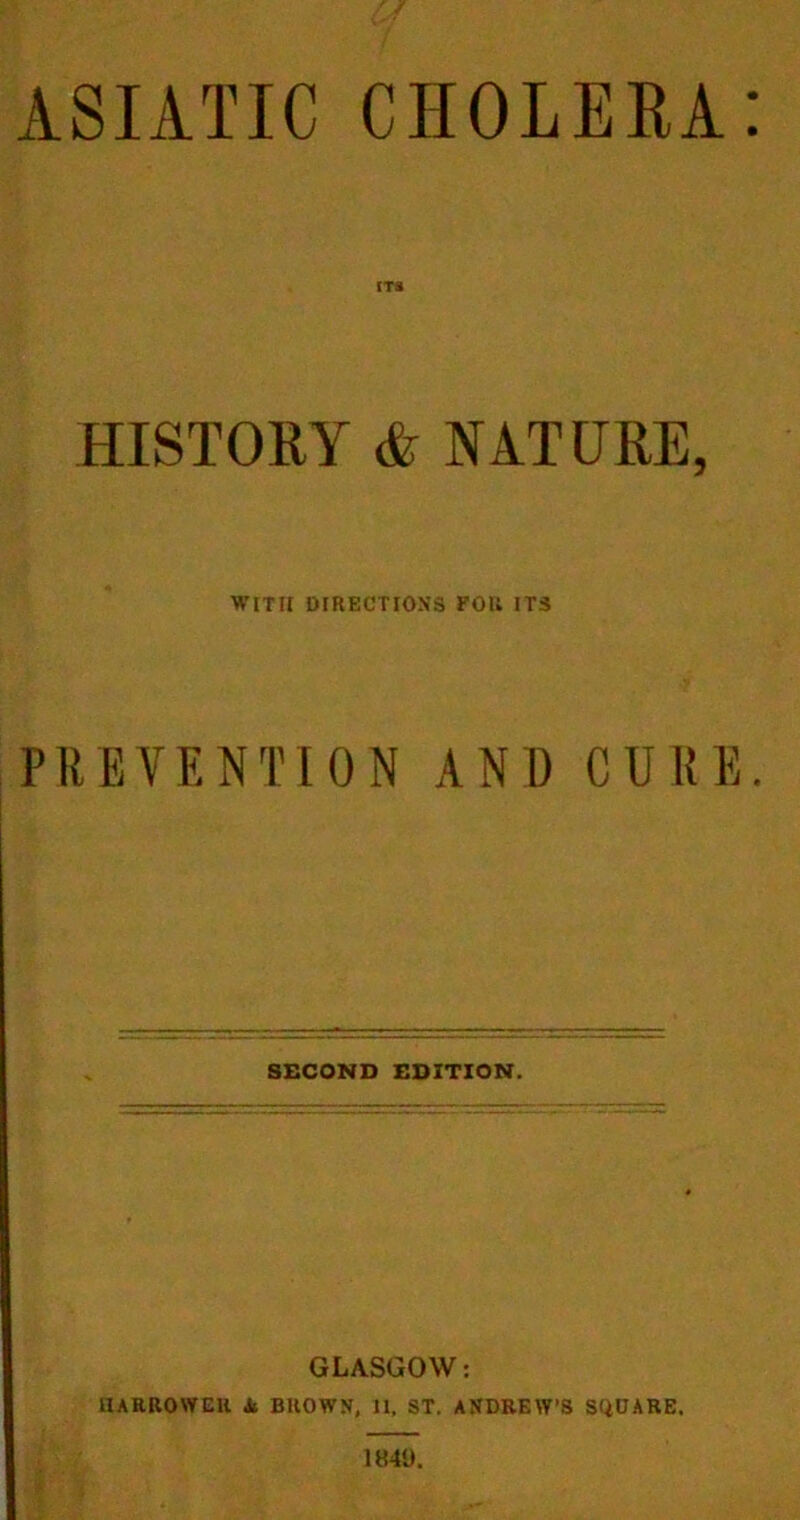 ASIATIC CHOLERA ITS HISTORY & NATURE, WITH DIRECTIONS FOR ITS PREVENTION AND CURE SECOND EDITION. GLASGOW: